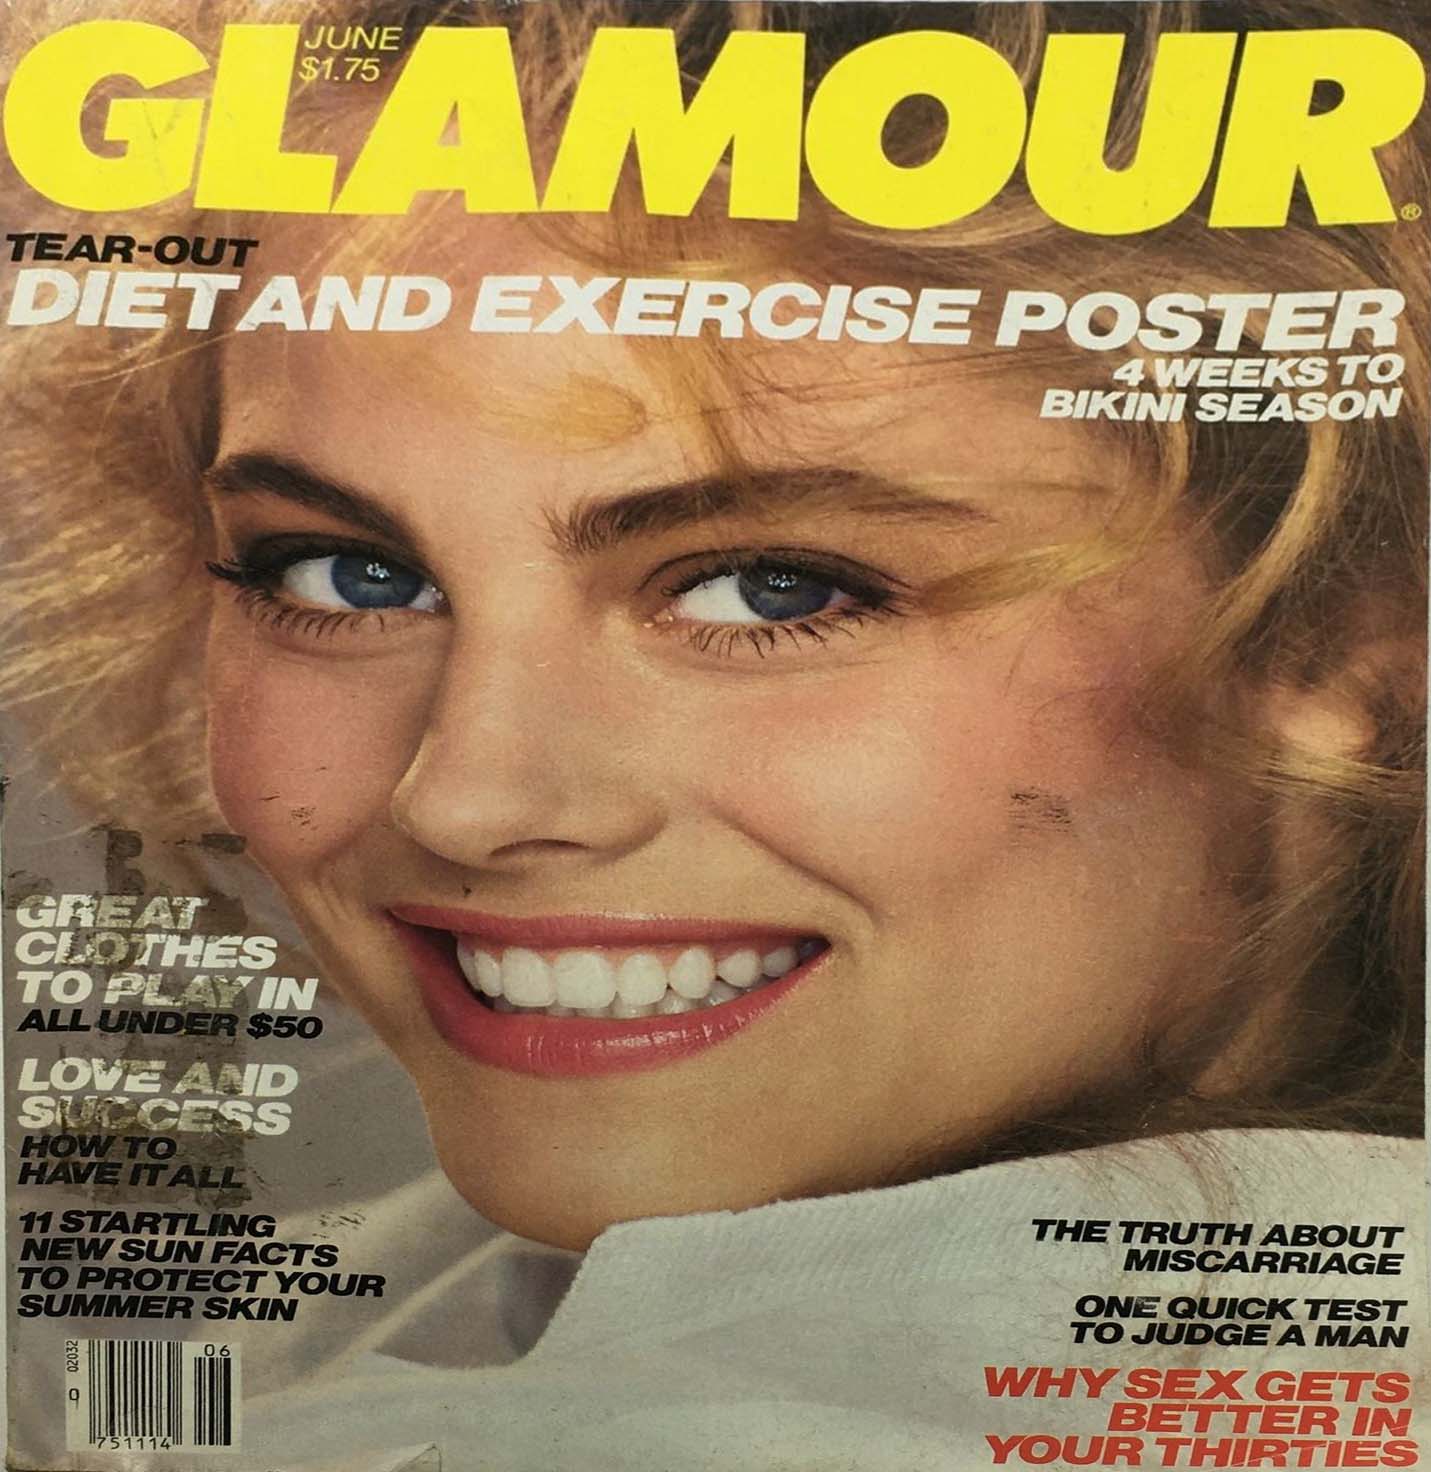 Glamour June 1981 magazine back issue Glamour magizine back copy Glamour June 1981 Womens Magazine Back Issue Published by Conde Nast Publications. Tear - Out Diet And Exercise Poster 4 Weeks To Bikini Season.